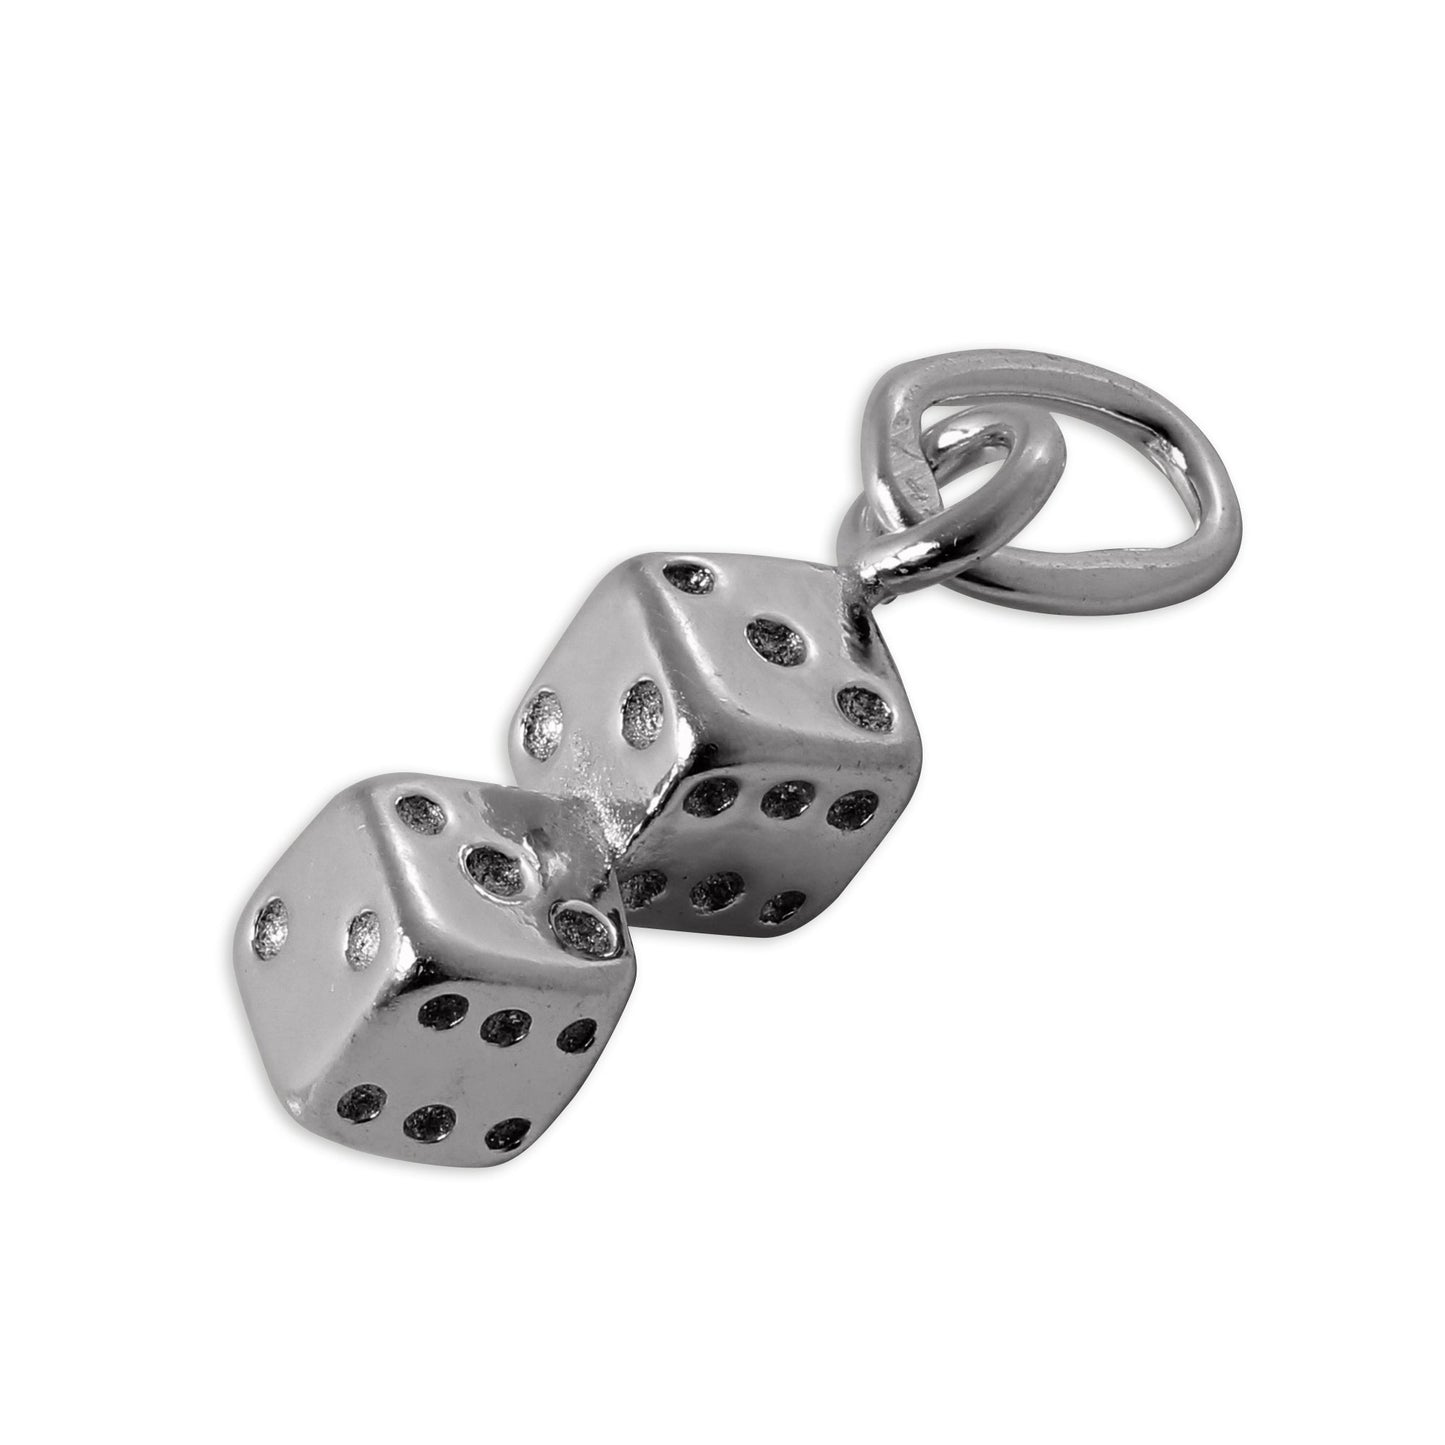 Small Sterling Silver Pair of Dice Charm